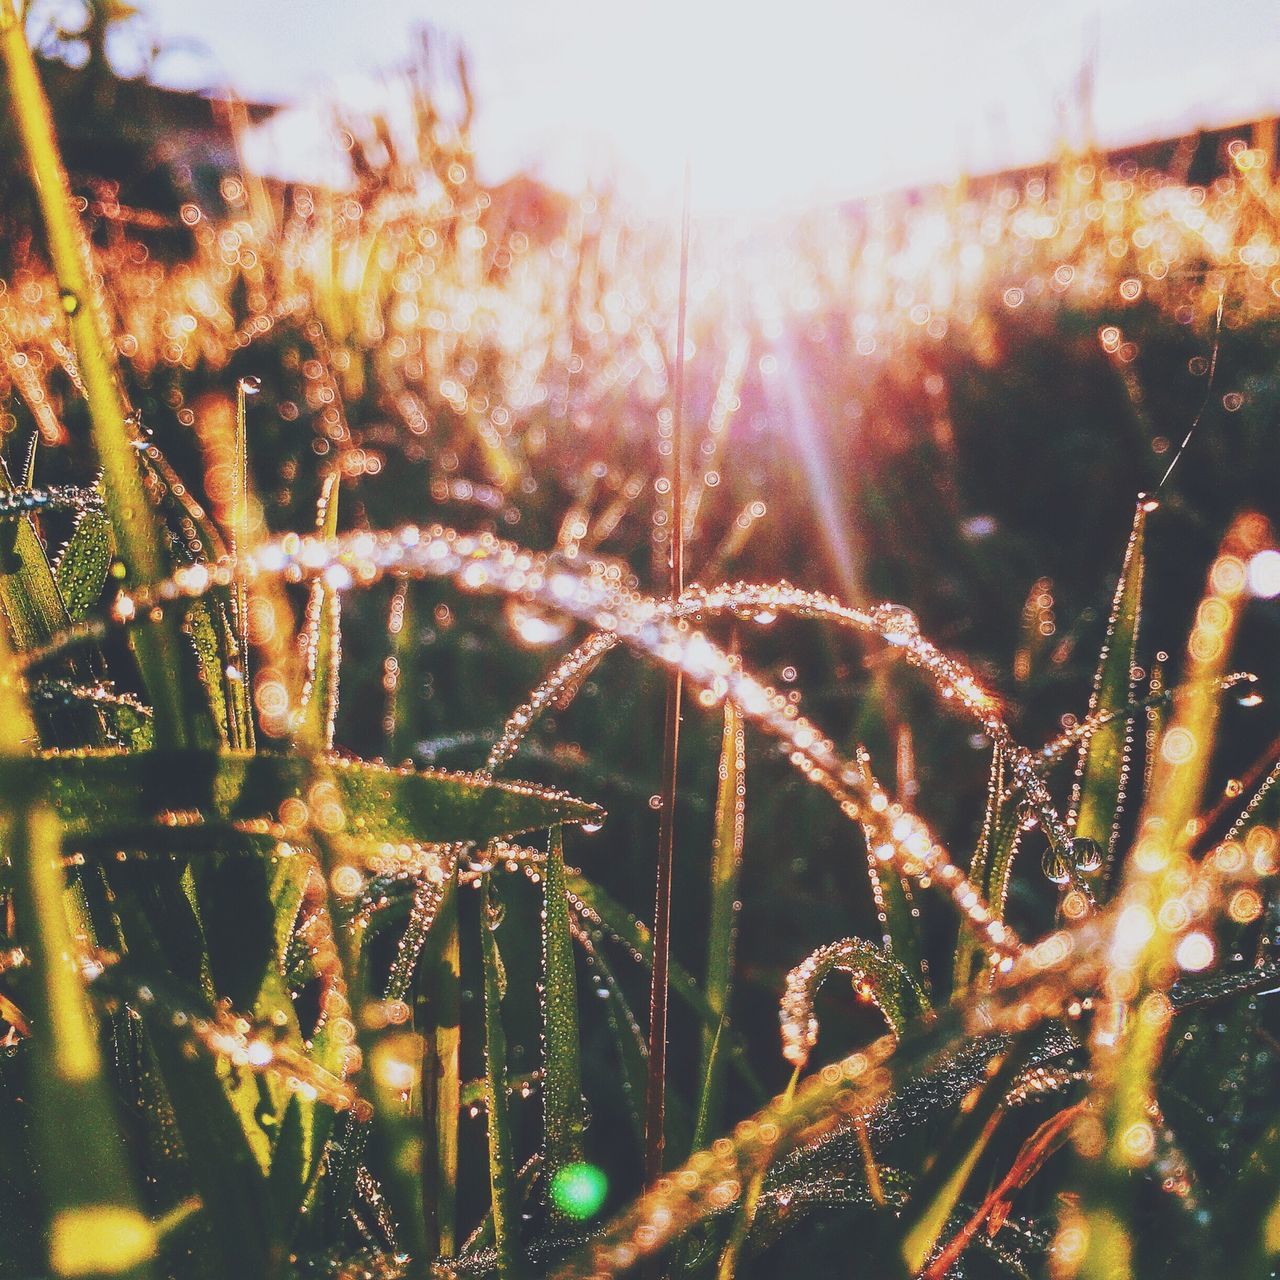 growth, plant, focus on foreground, close-up, nature, spider web, beauty in nature, lens flare, fragility, sun, sunlight, tranquility, outdoors, selective focus, water, drop, field, grass, no people, freshness